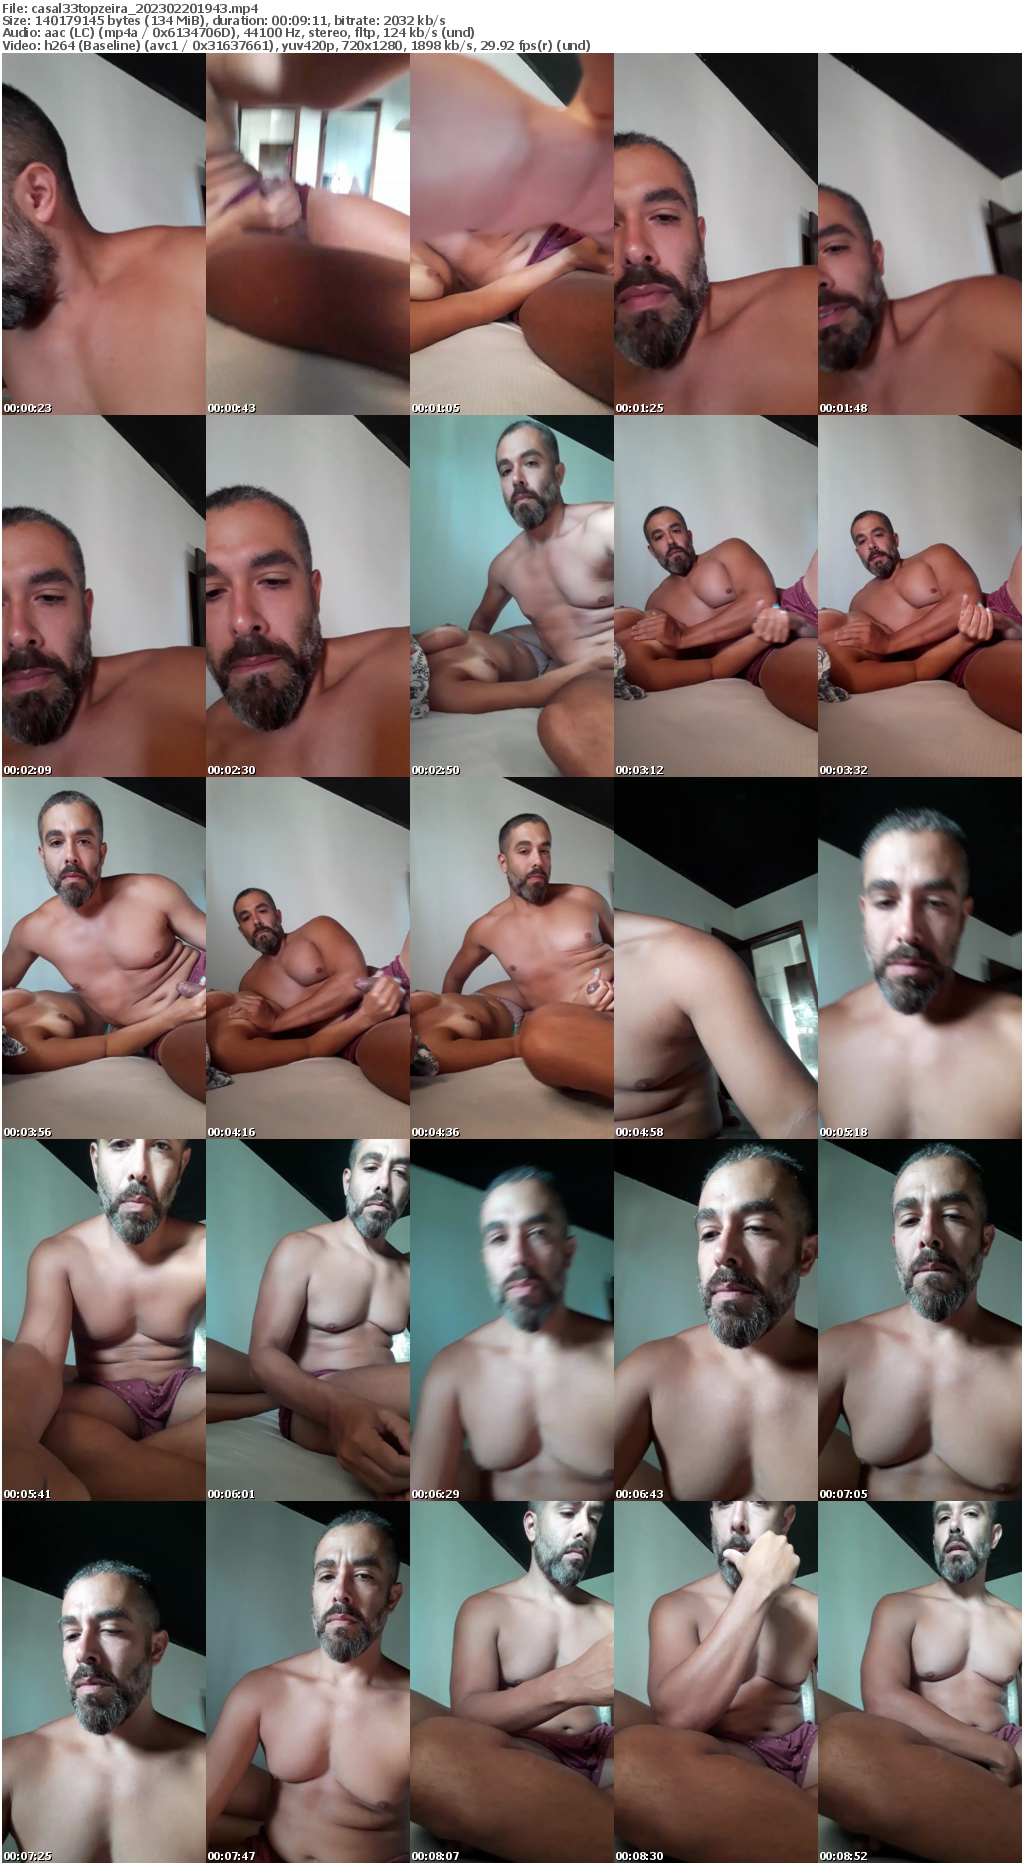 Preview thumb from casal33topzeira on 2023-02-20 @ cam4